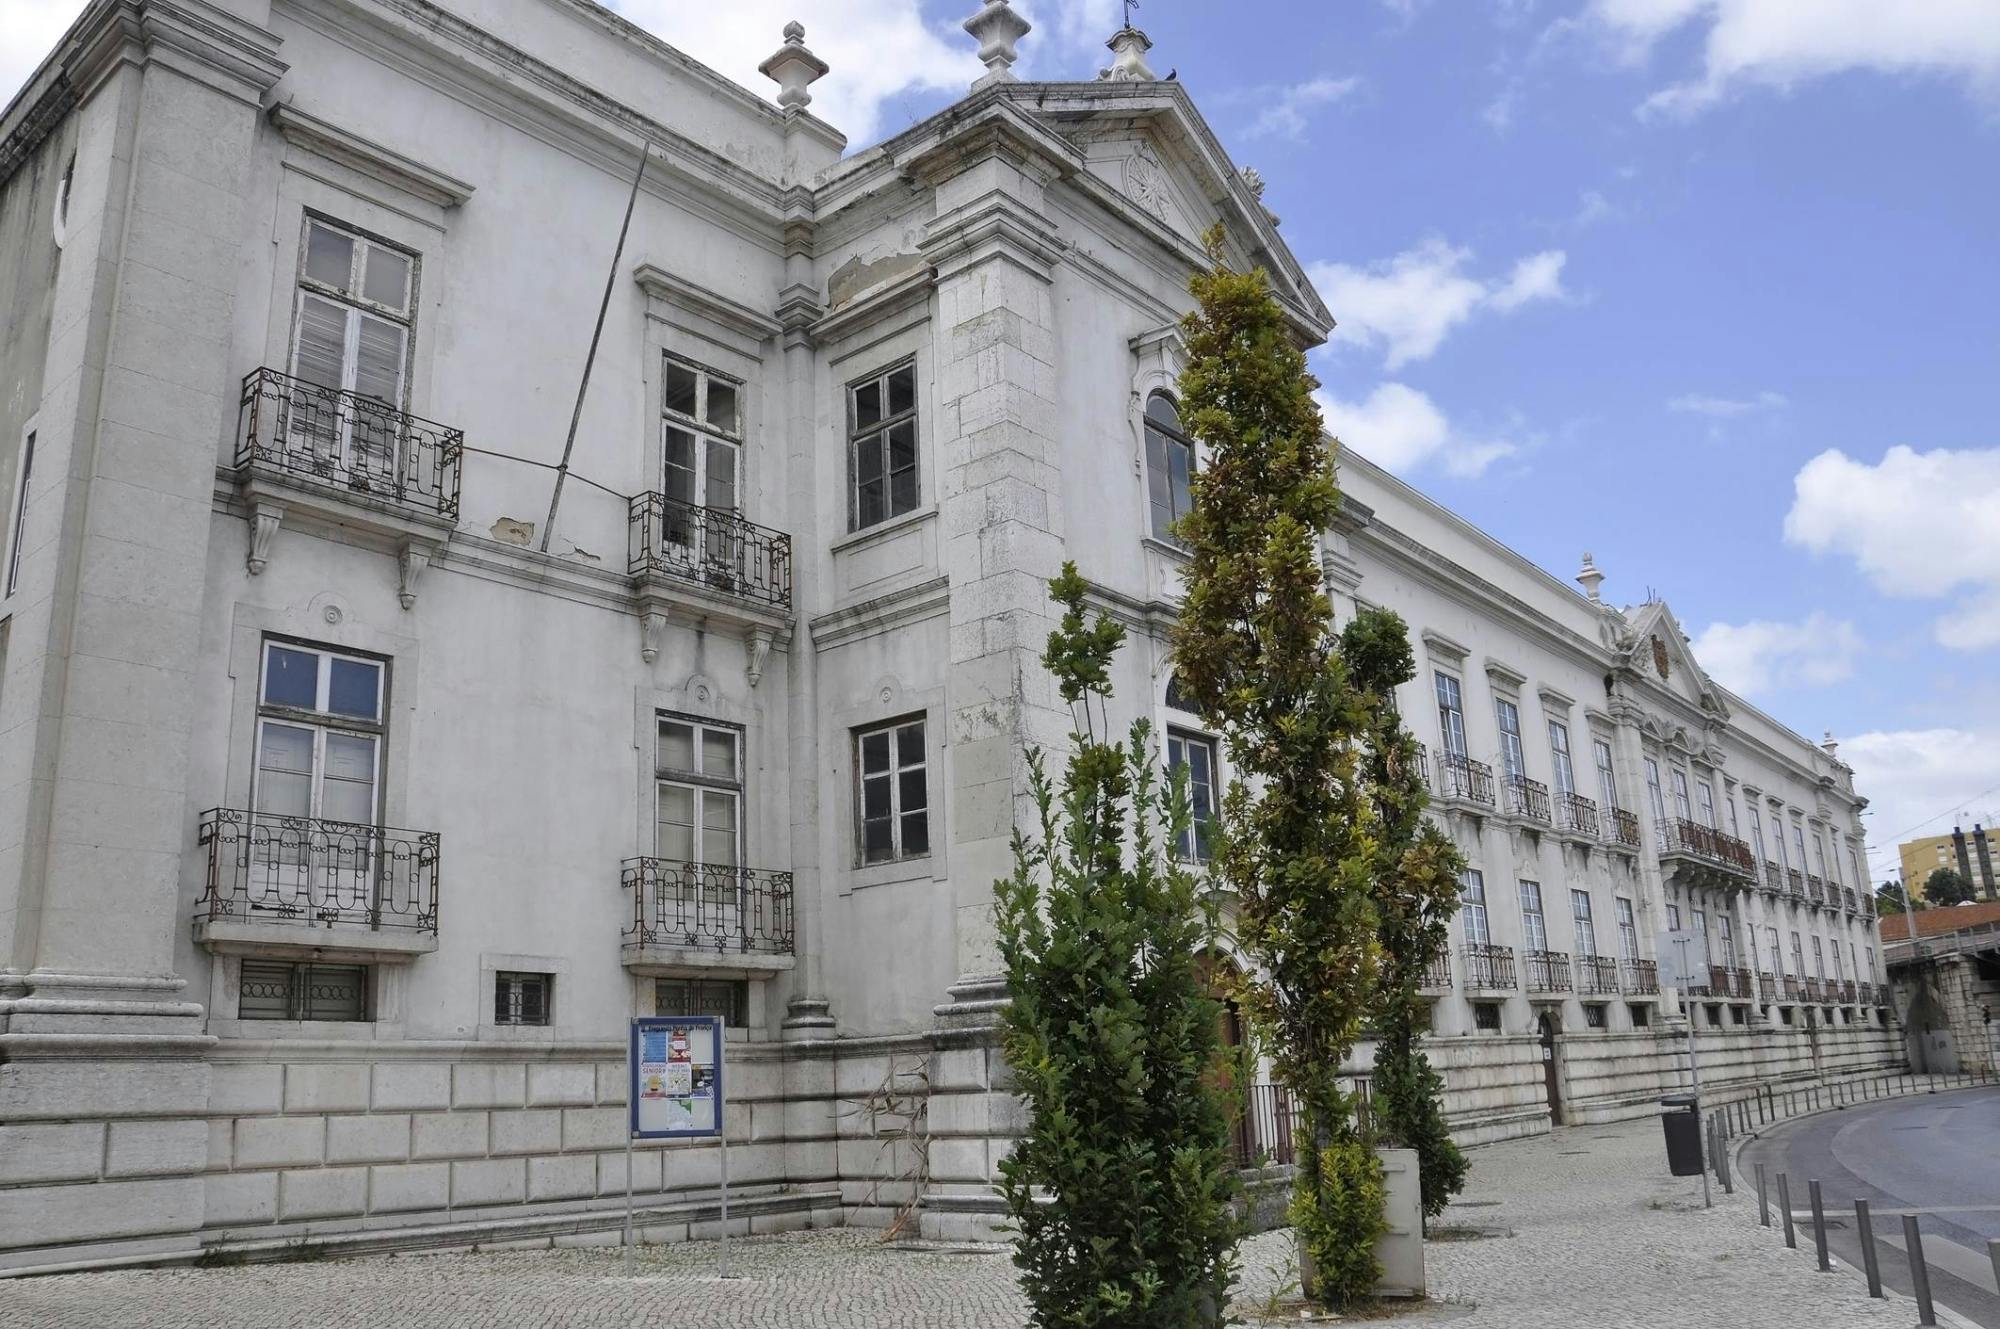 Lisbon National Tile Museum skip-the-line tickets with audio tour